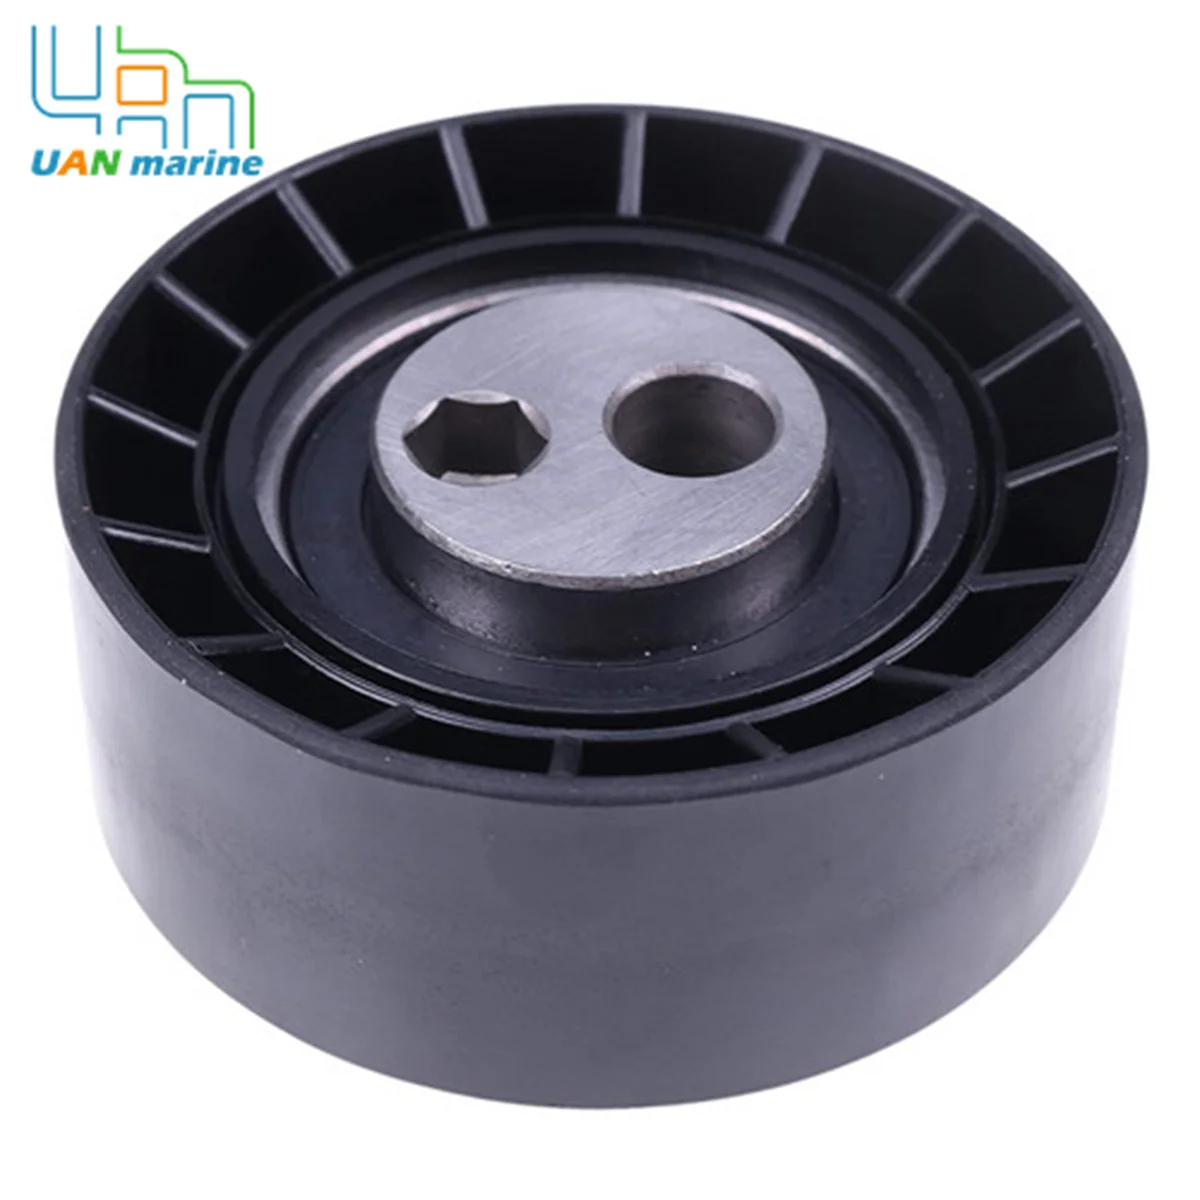 70mm Serpentine Belt Tensioner Pulley For Volvo Penta  KAD42P-A  KAMD42P-A  KDA42B Replaces  861563 877180